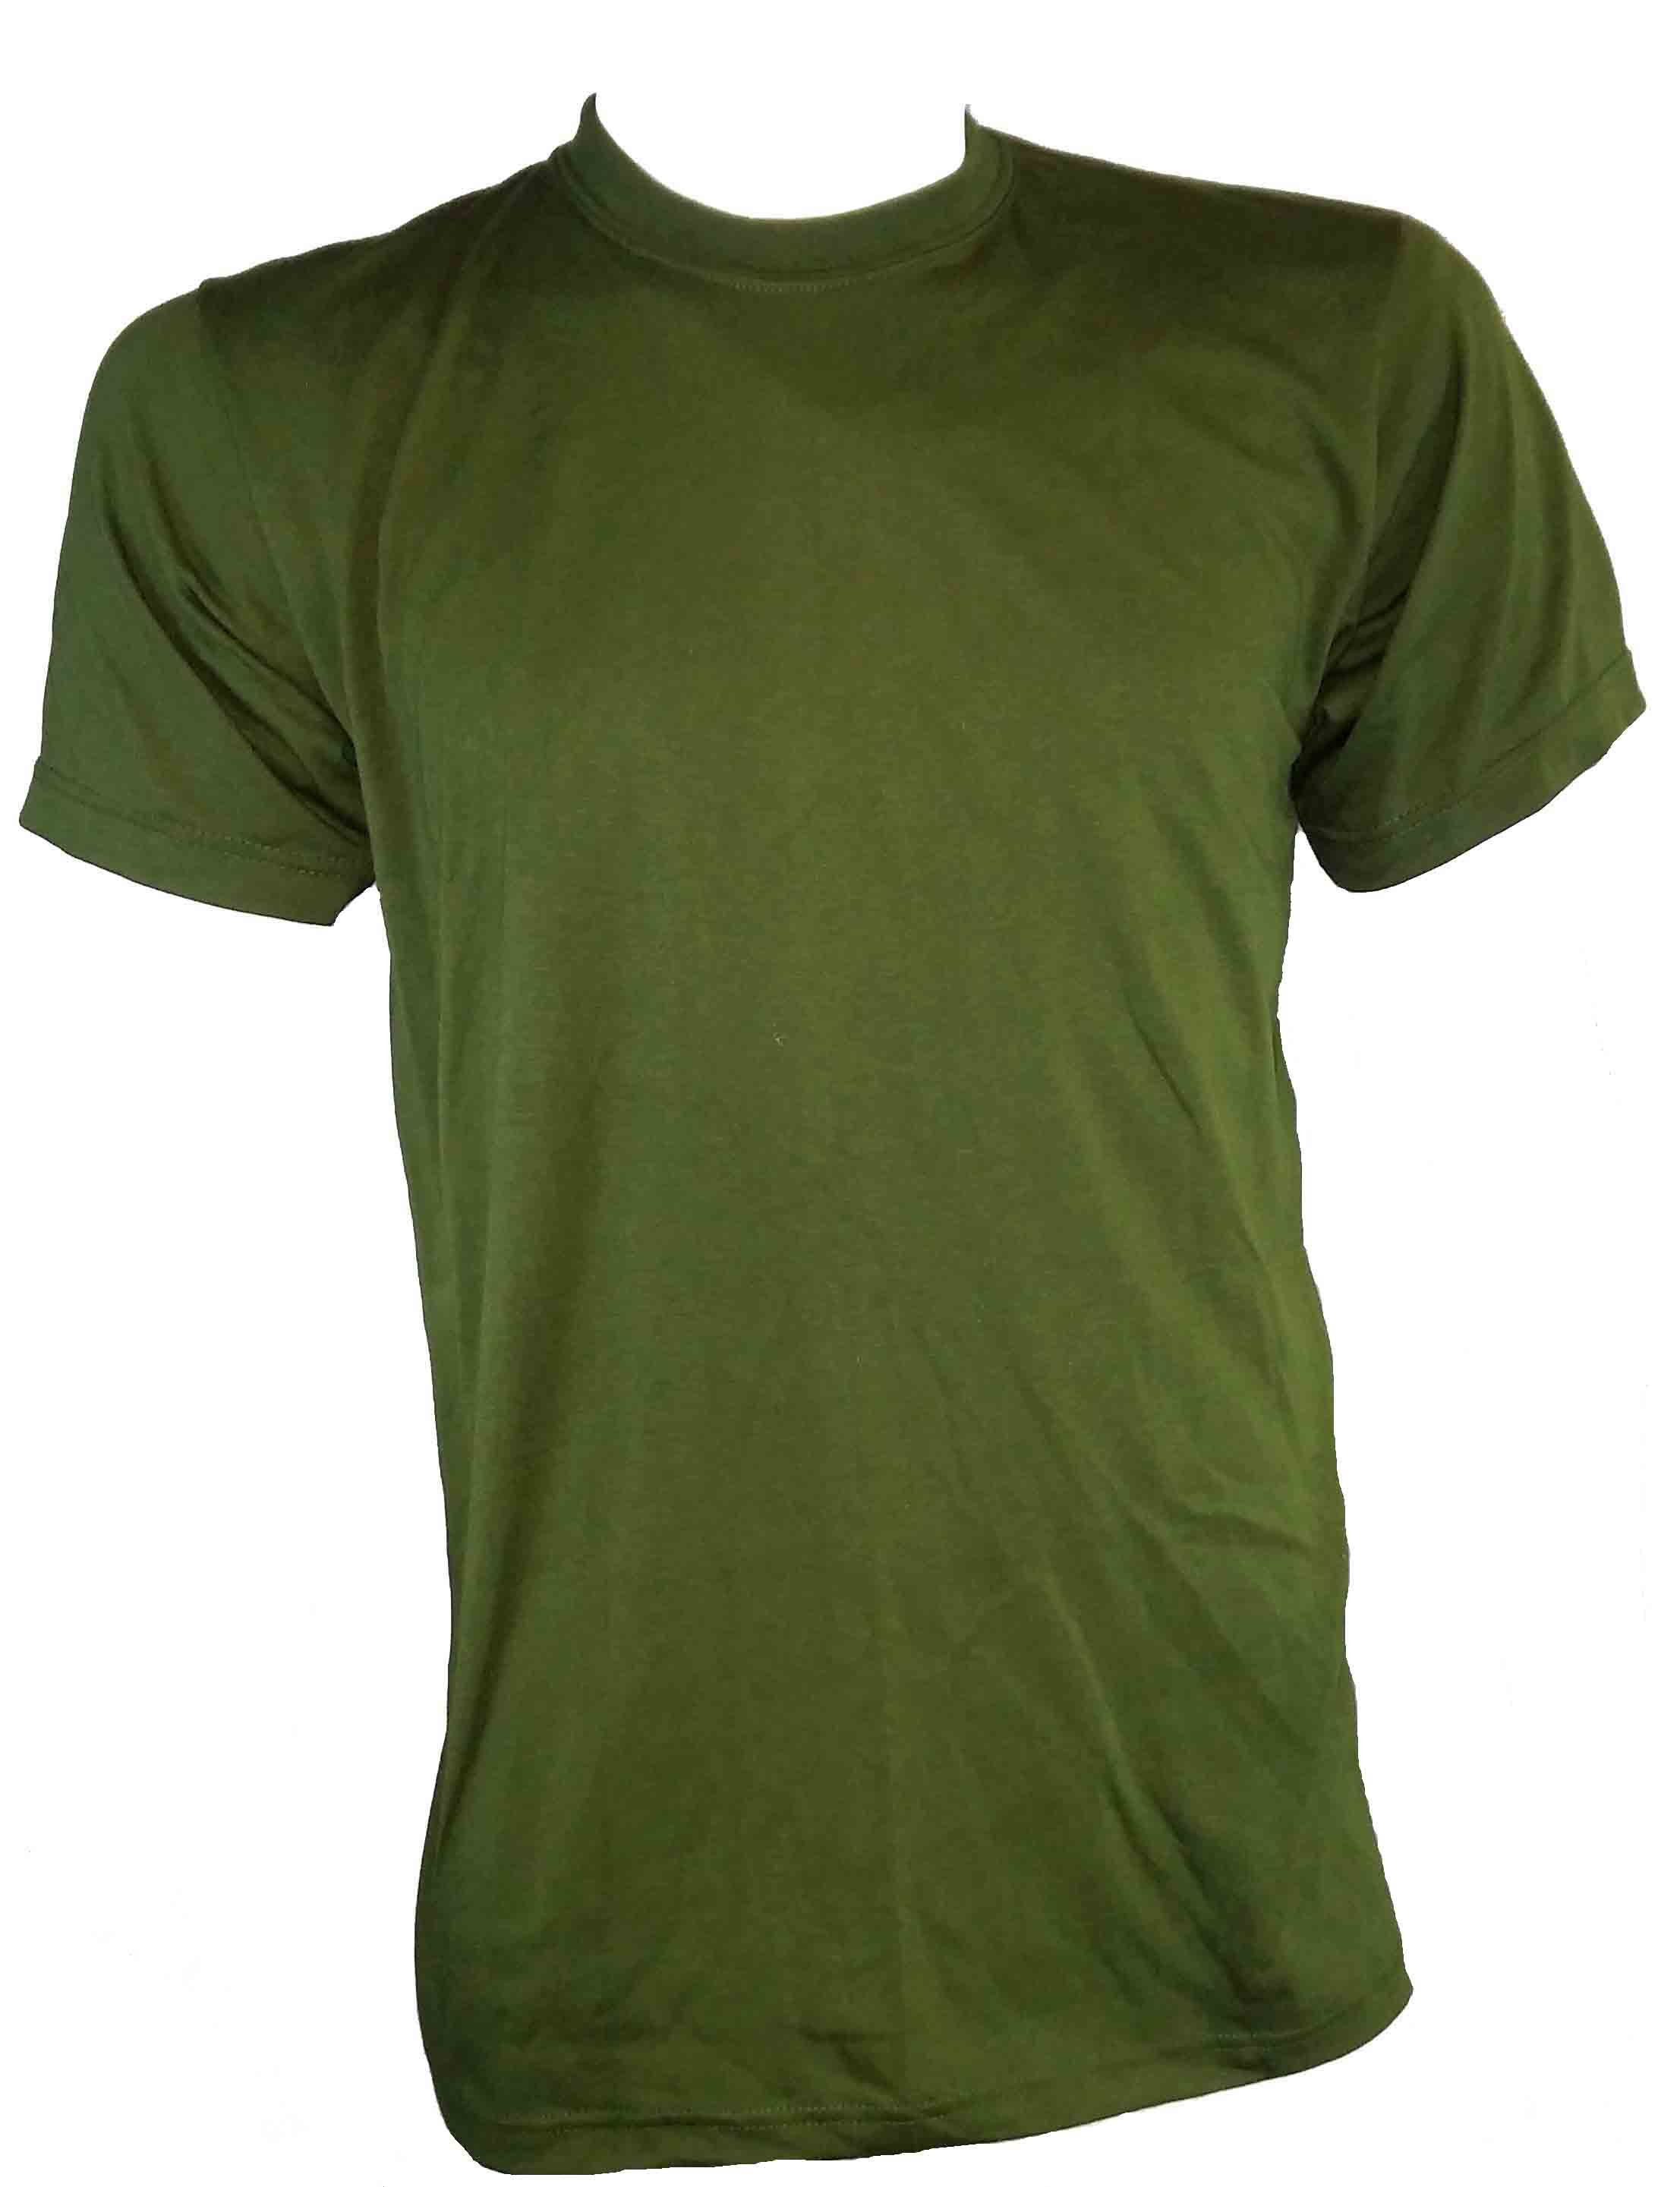 MILITARY STYLE T-SHIRT O/D ROUND NECK